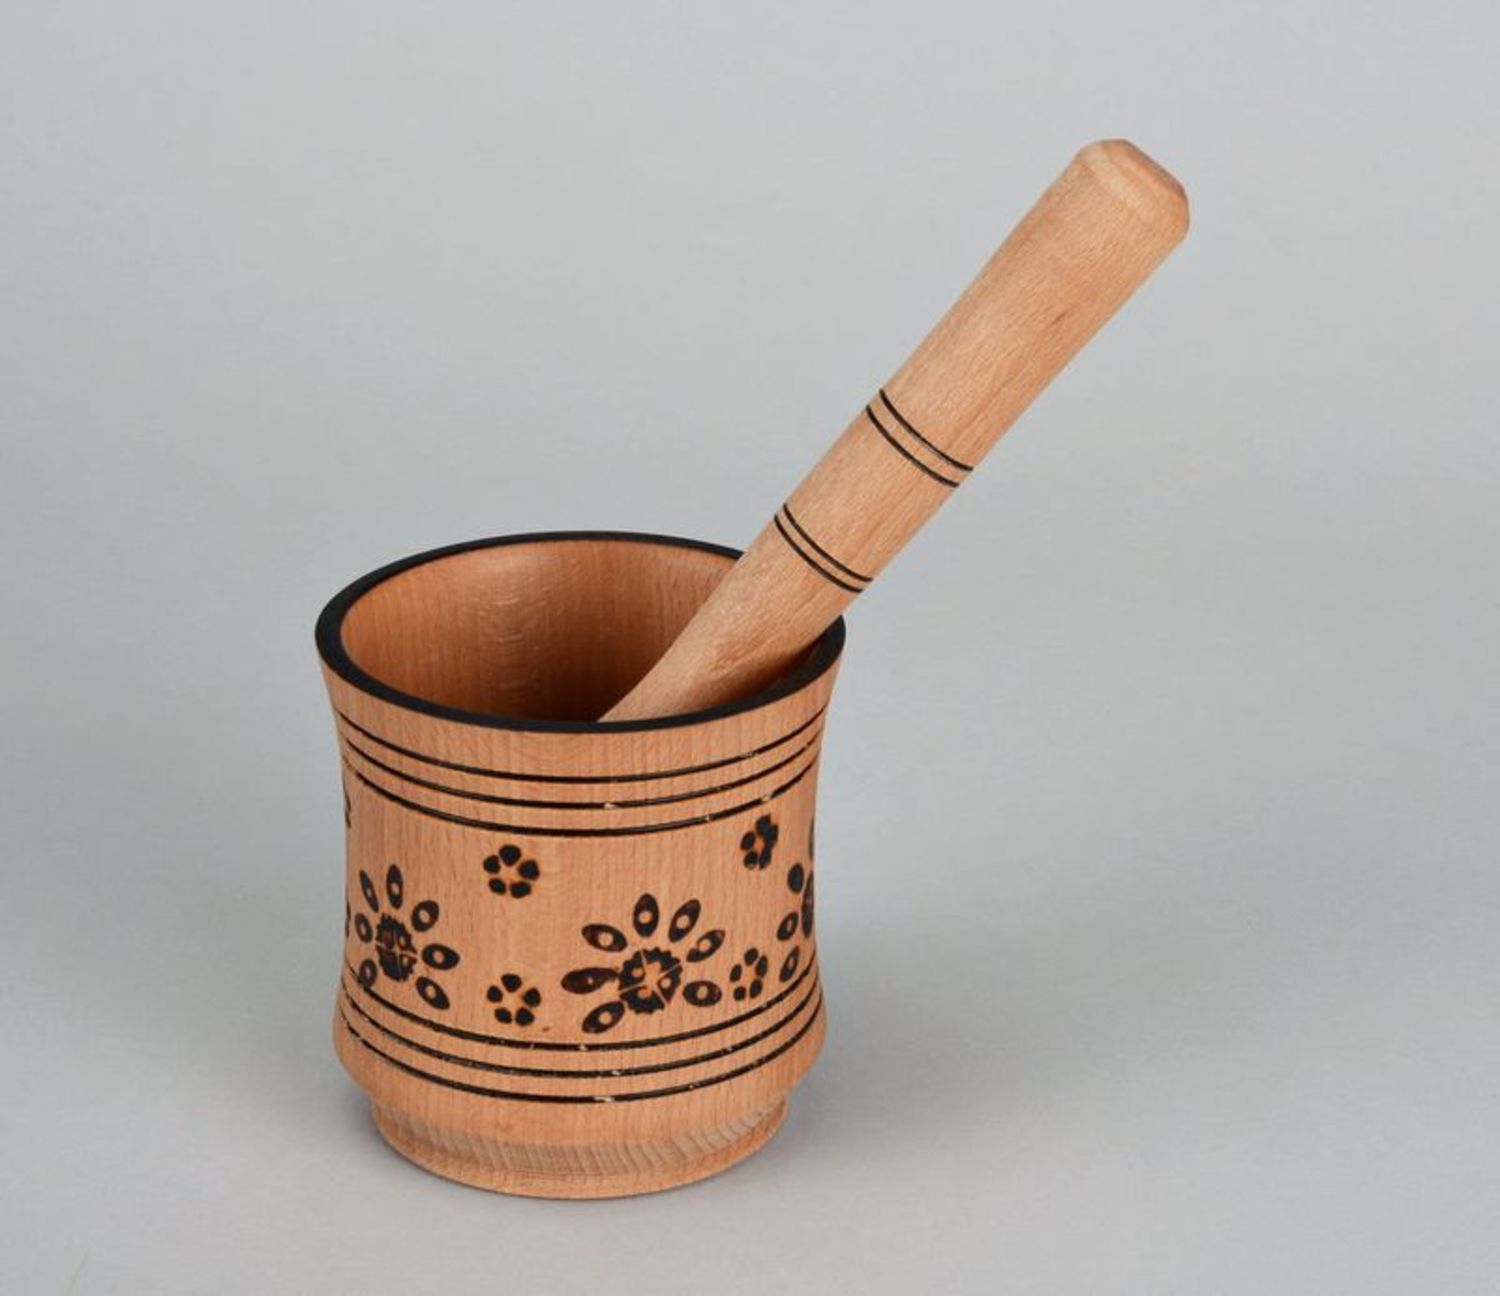 Wooden mortar with pestle photo 1